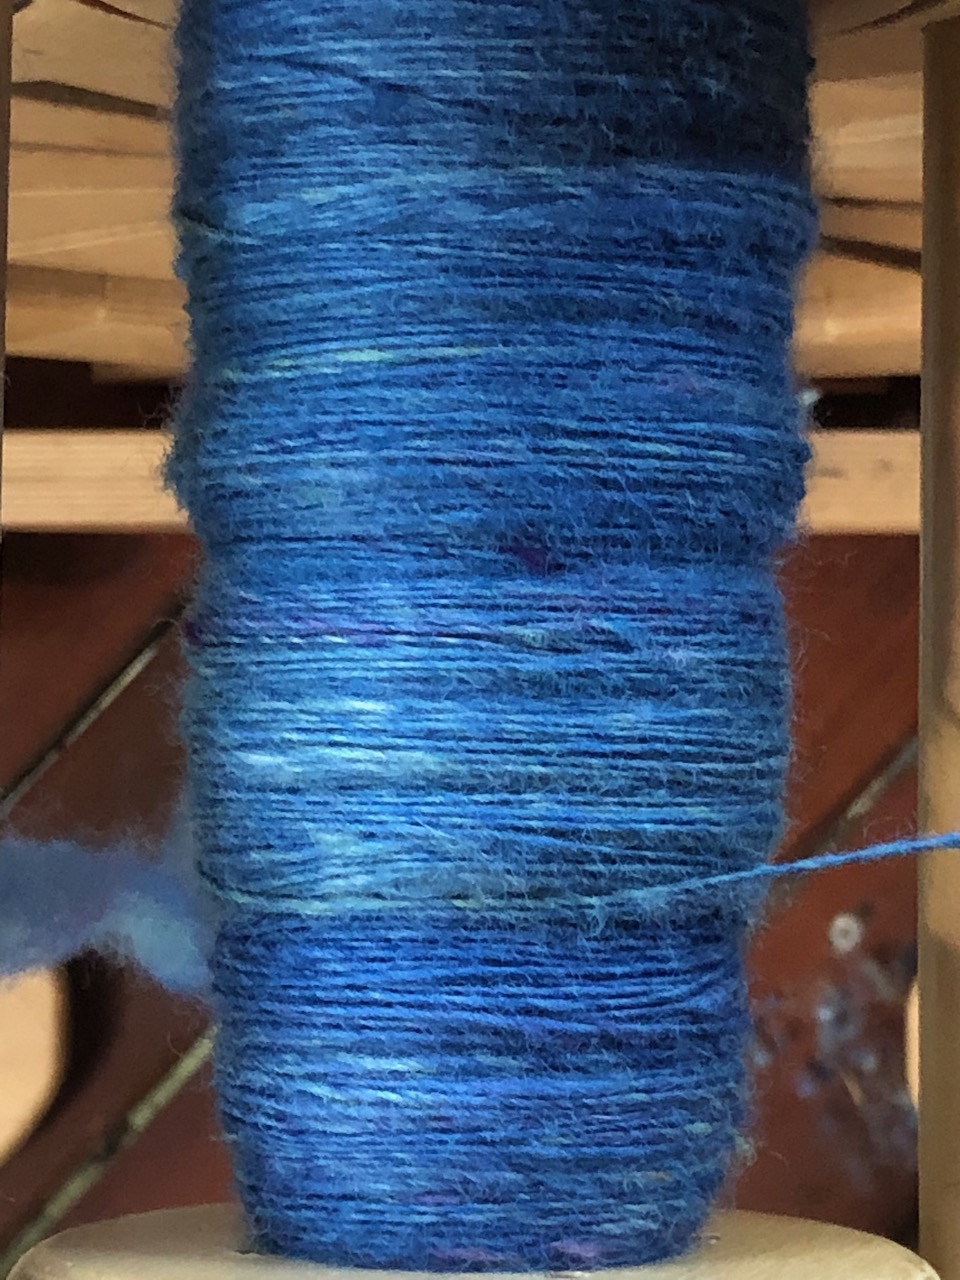 Unplied singles (Blue-faced Leicester/Cormo cross, hand-dyed)